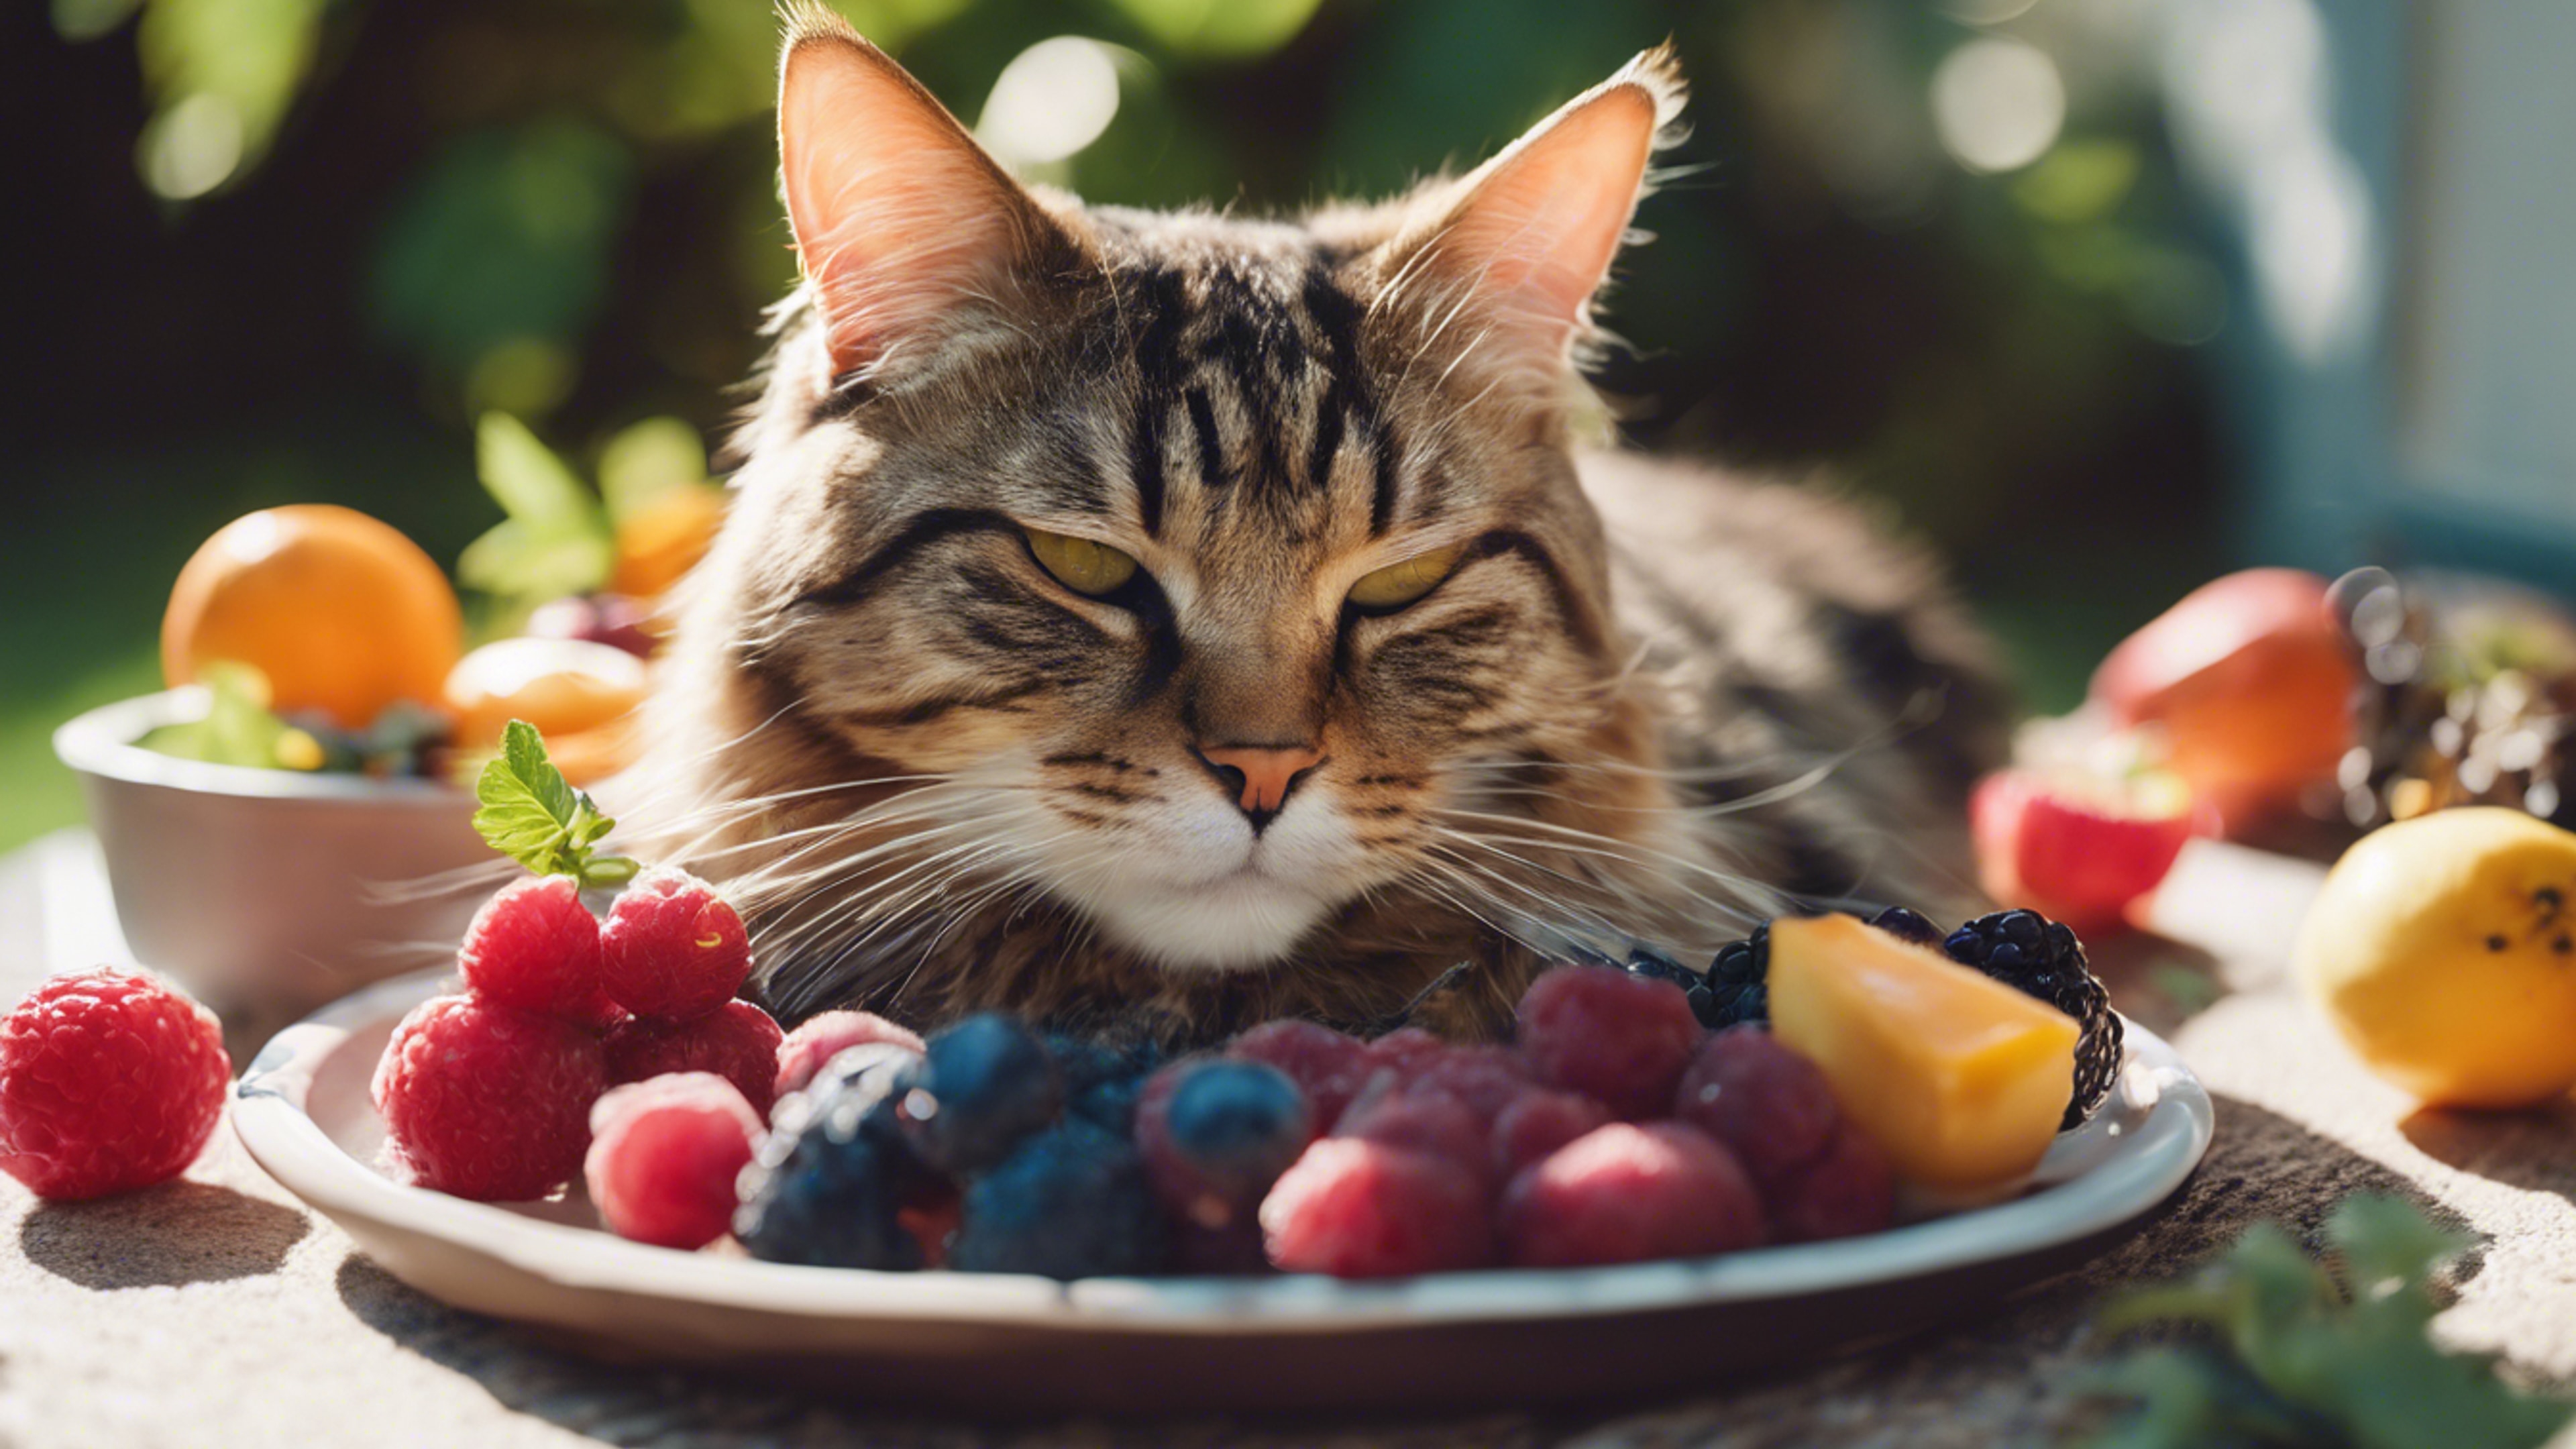 A sleepy Maine Coon cat relaxing next to a bowl of vibrant summer fruits. Tapet[5a3905f0581c45108121]